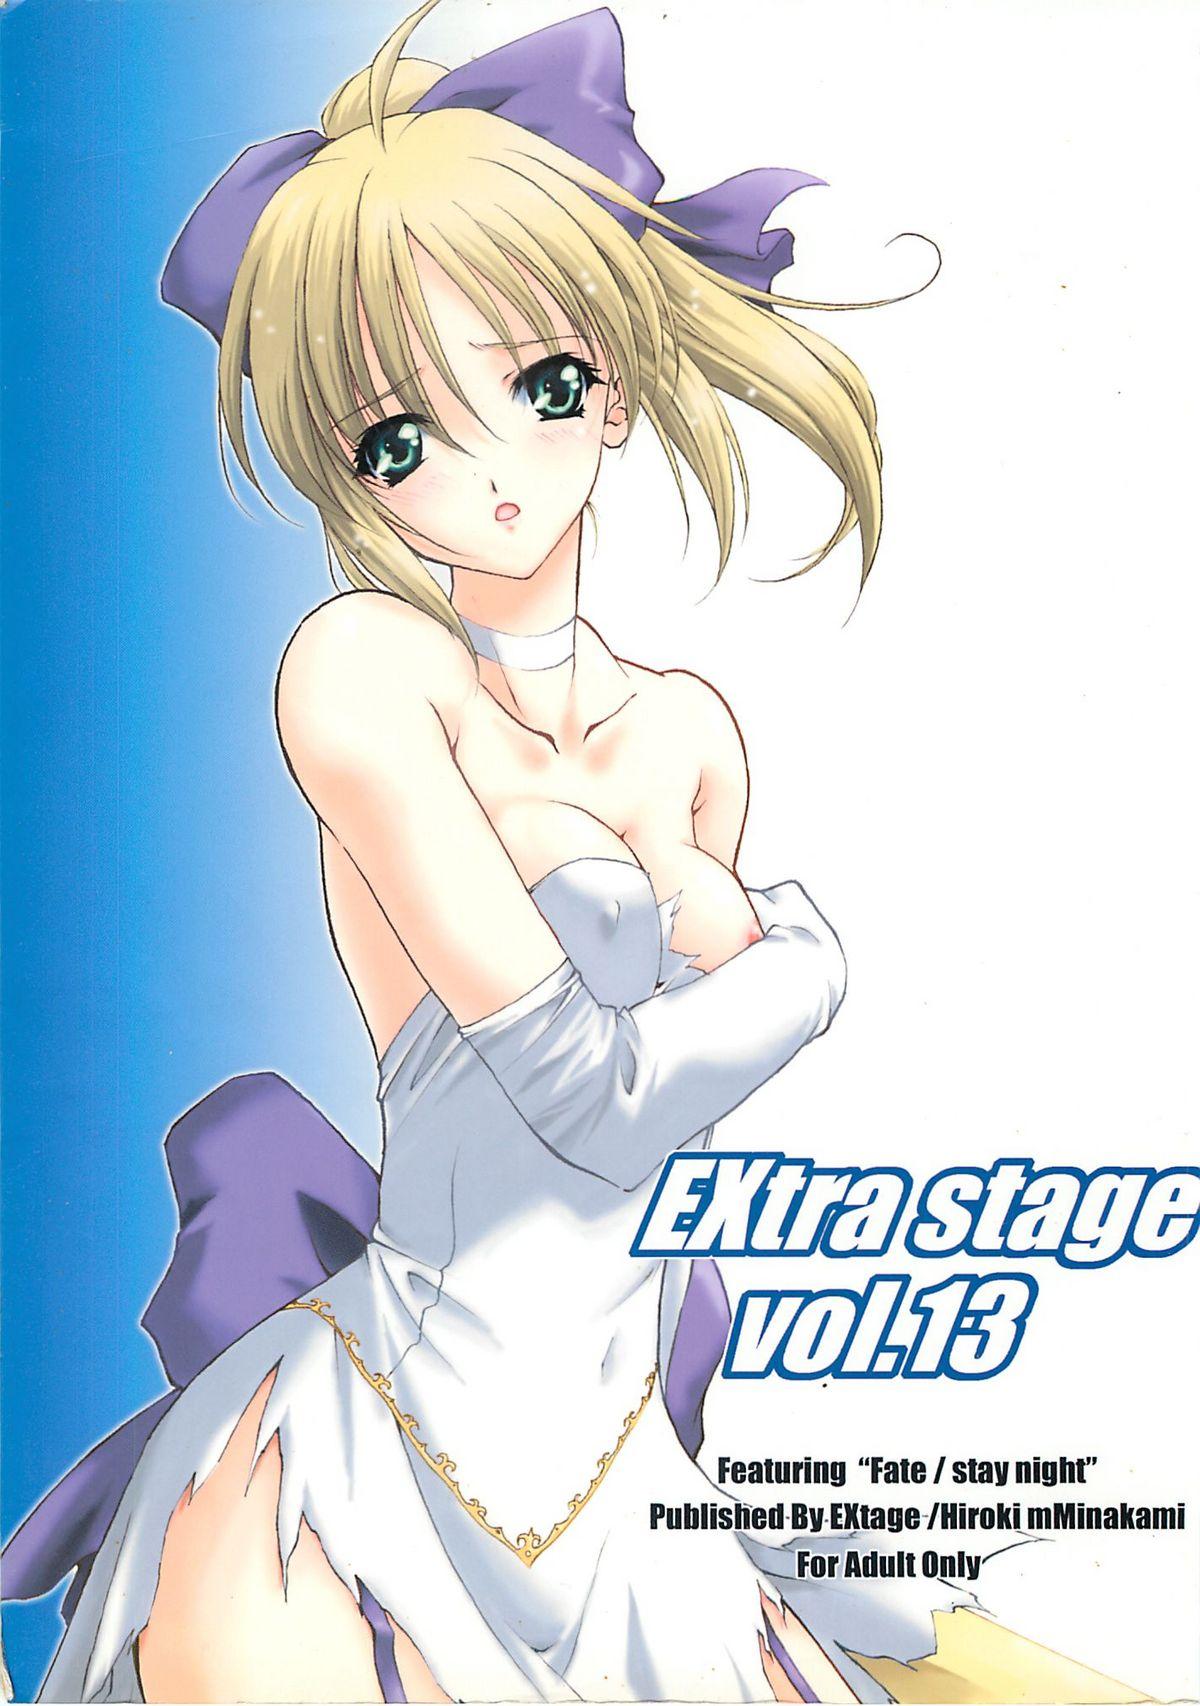 EXtra stage vol. 13 0